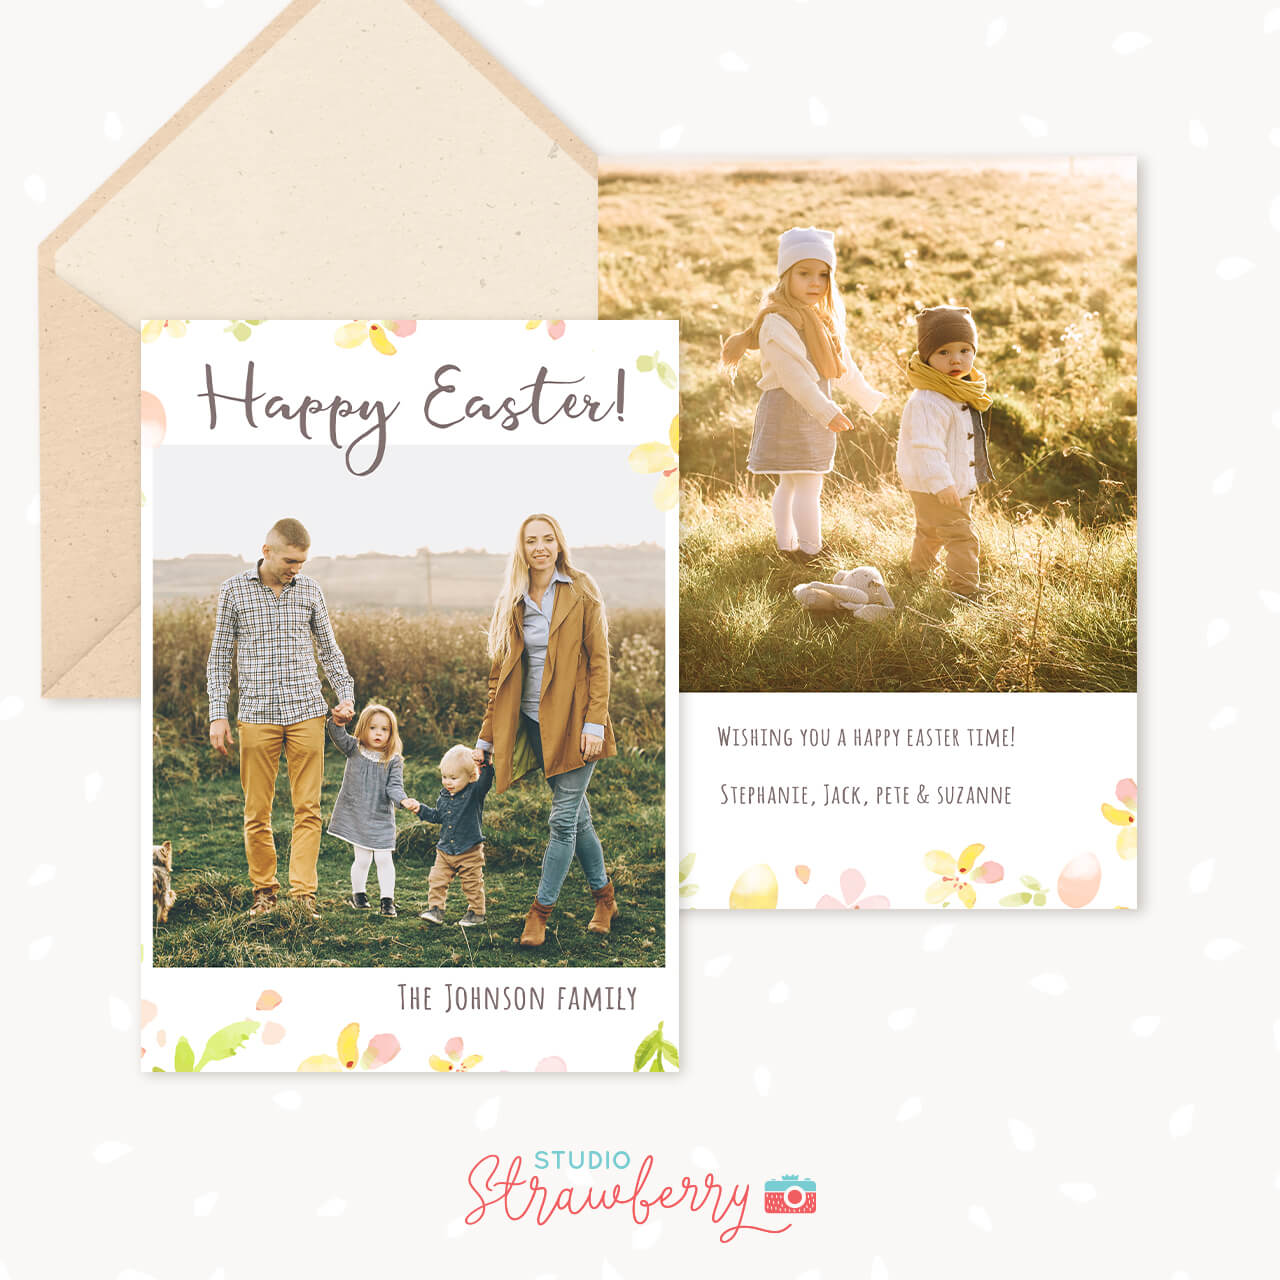 Happy Easter Greeting Card Template Photoshop